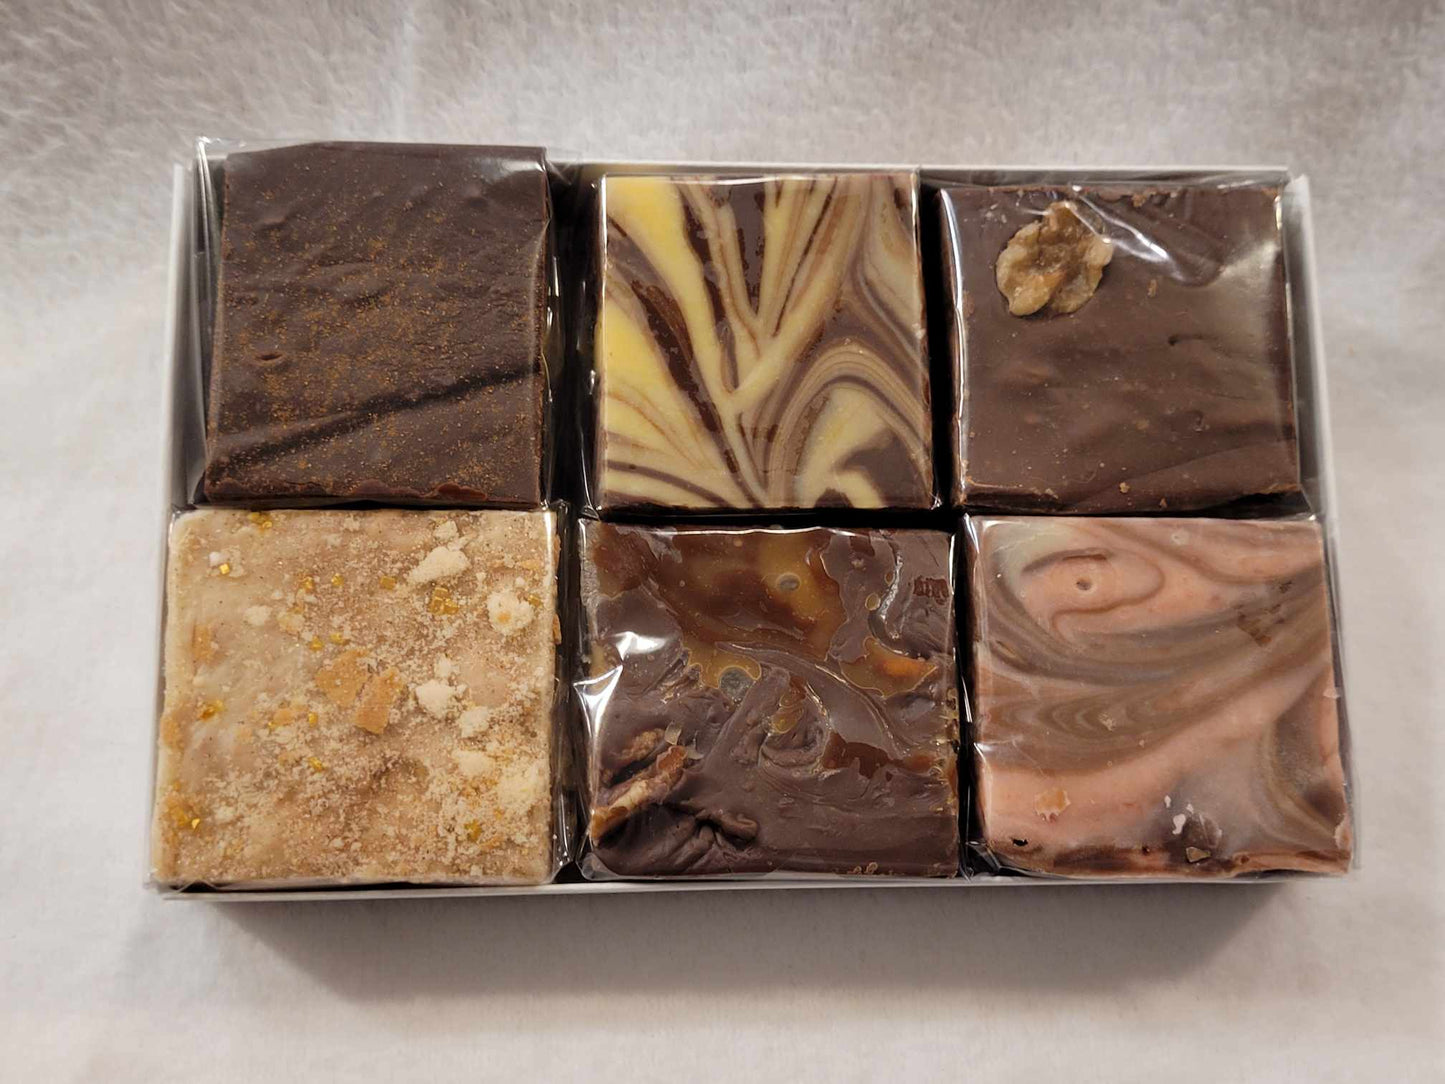 6 Piece Fudge Sampler in Gift Box - Your Choice of Flavors